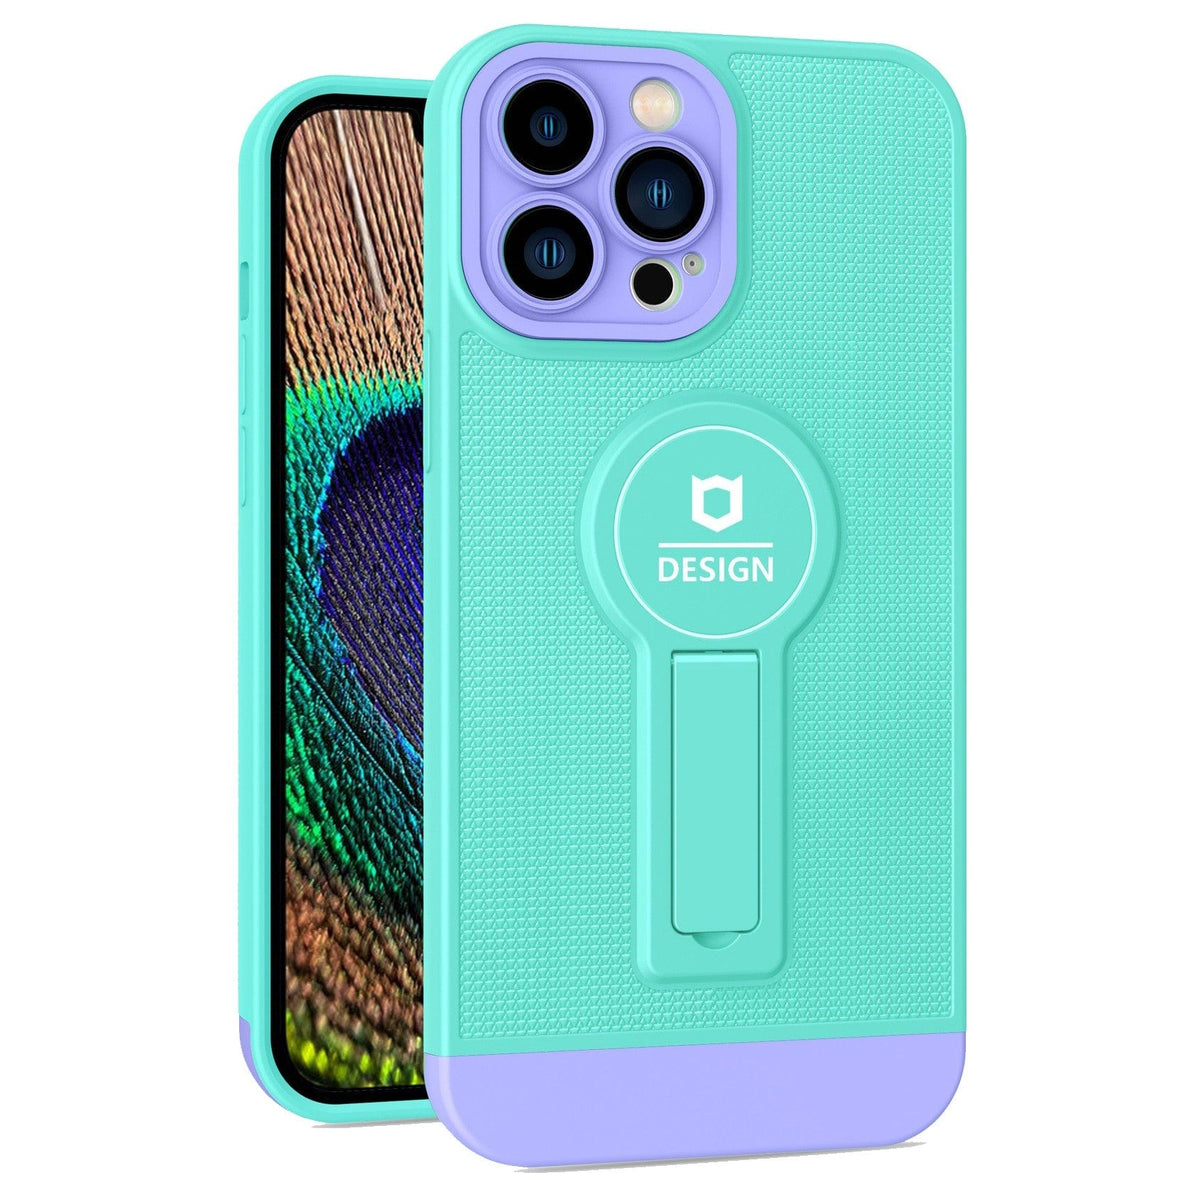 HUSA ARMOR DESIGN CU STAND PENTRU SAMSUNG GALAXY A02S/ A03S, BLUE/MOV, SUPORT AUTO MAGNETIC, WIRELESS CHARGE, PROTECTIE ANTISOC